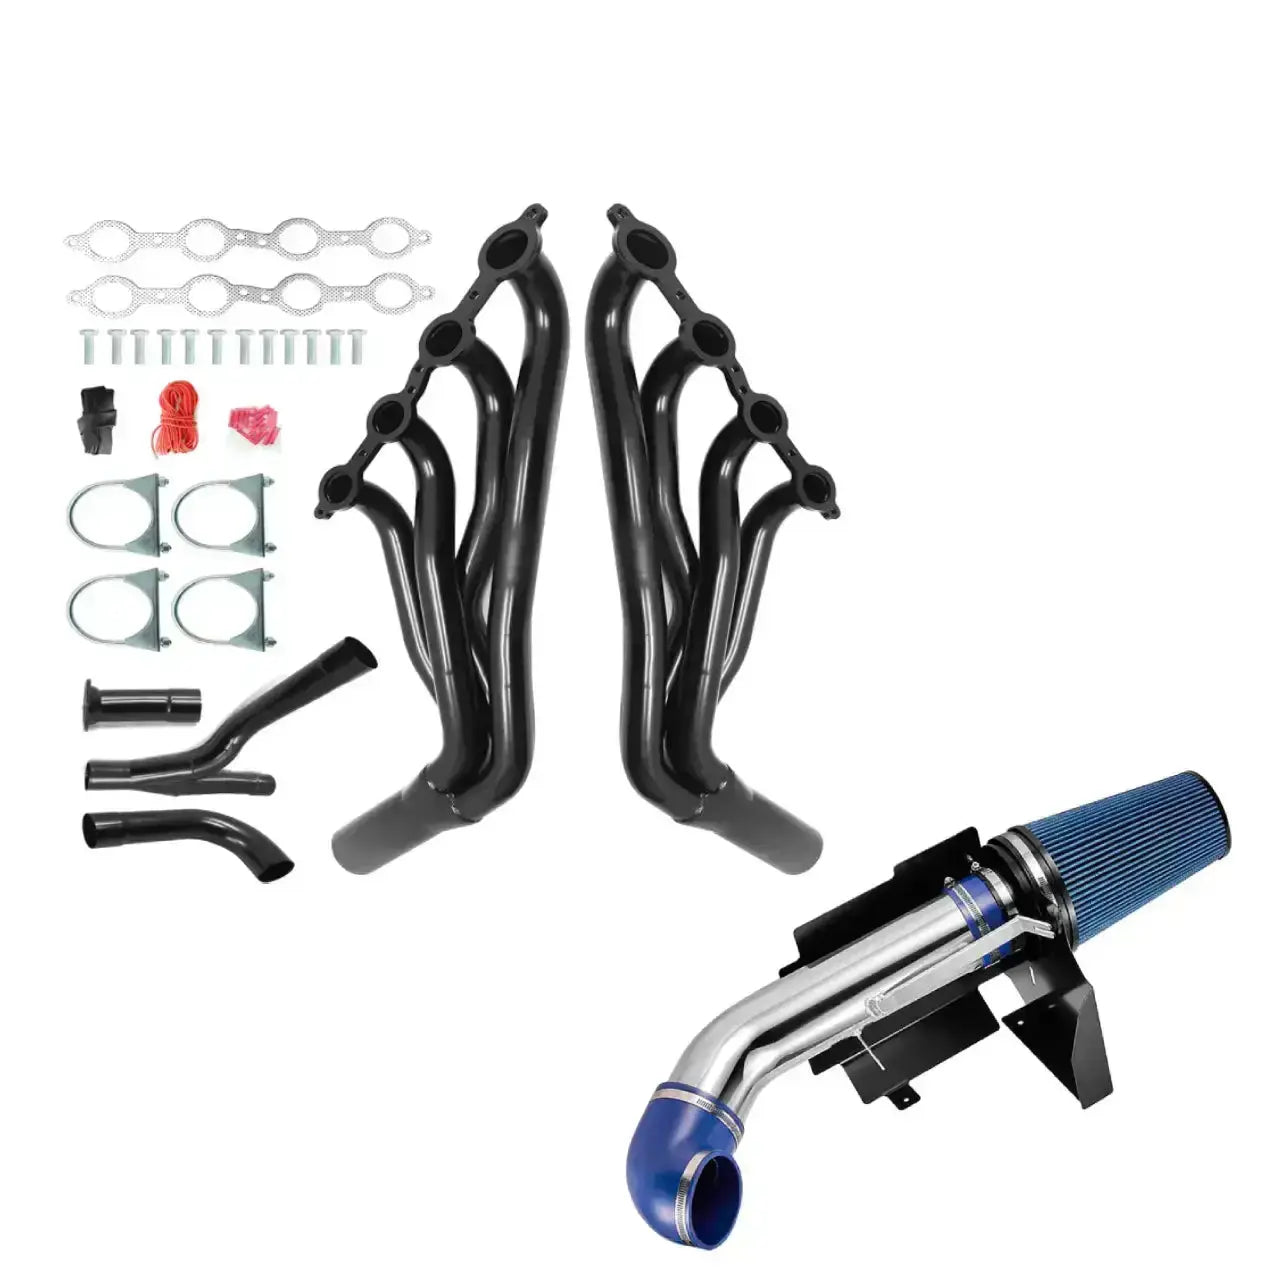 Exhaust Header/4" Cold Air Intake Kit All-In-One Kit for 1999-2006 Chevy/GMC GMT800 Silverado/Sierra/Avalanche 1500 Y-Pipe 2WD 4.8L 5.3L 6.0L Flashark